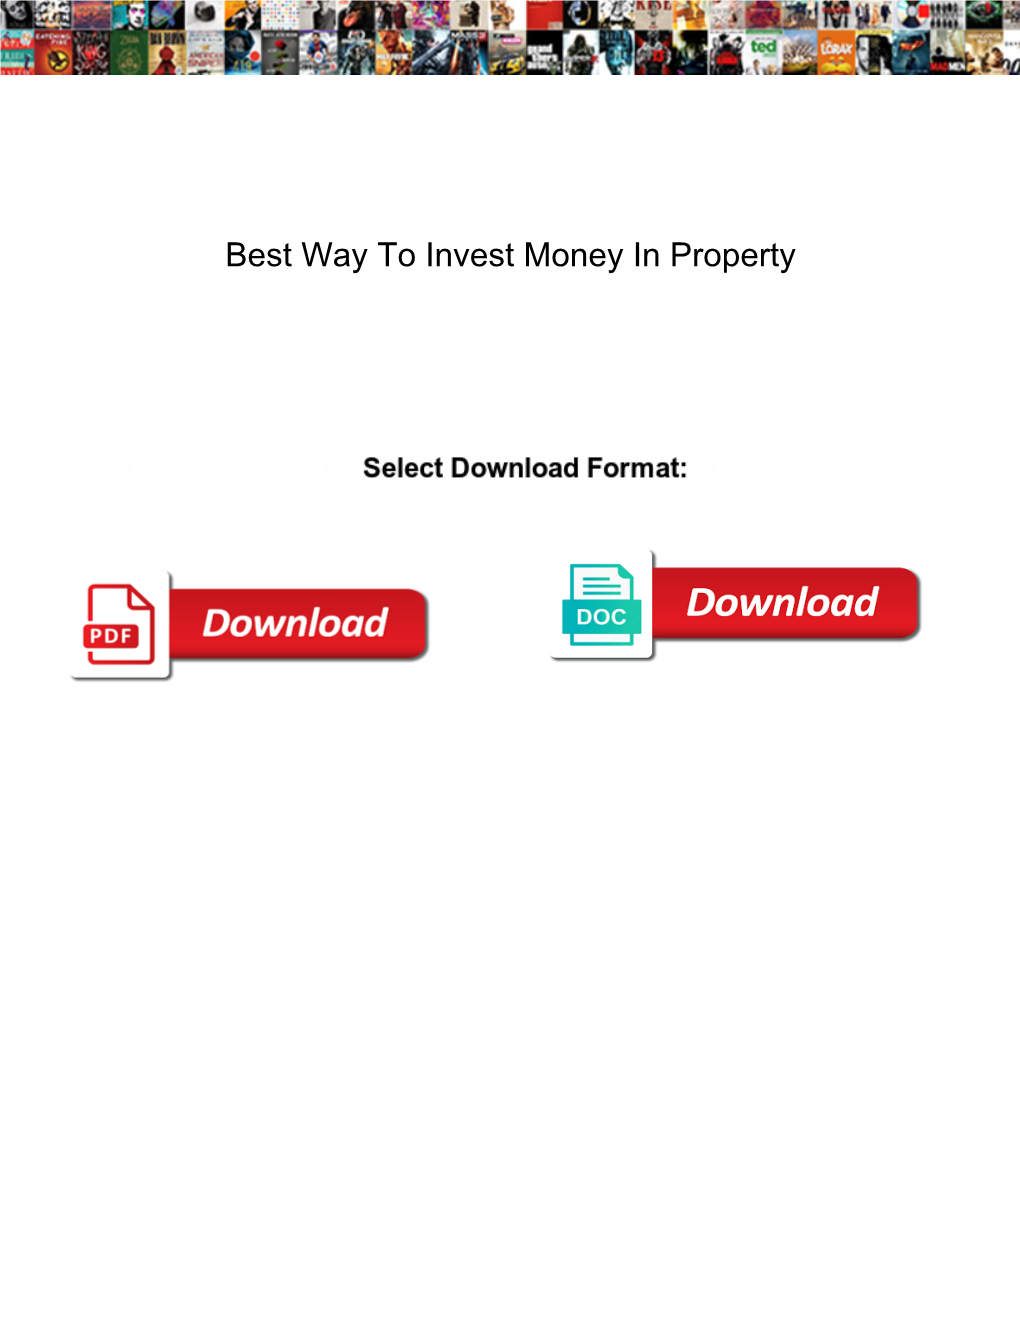 Best Way to Invest Money in Property